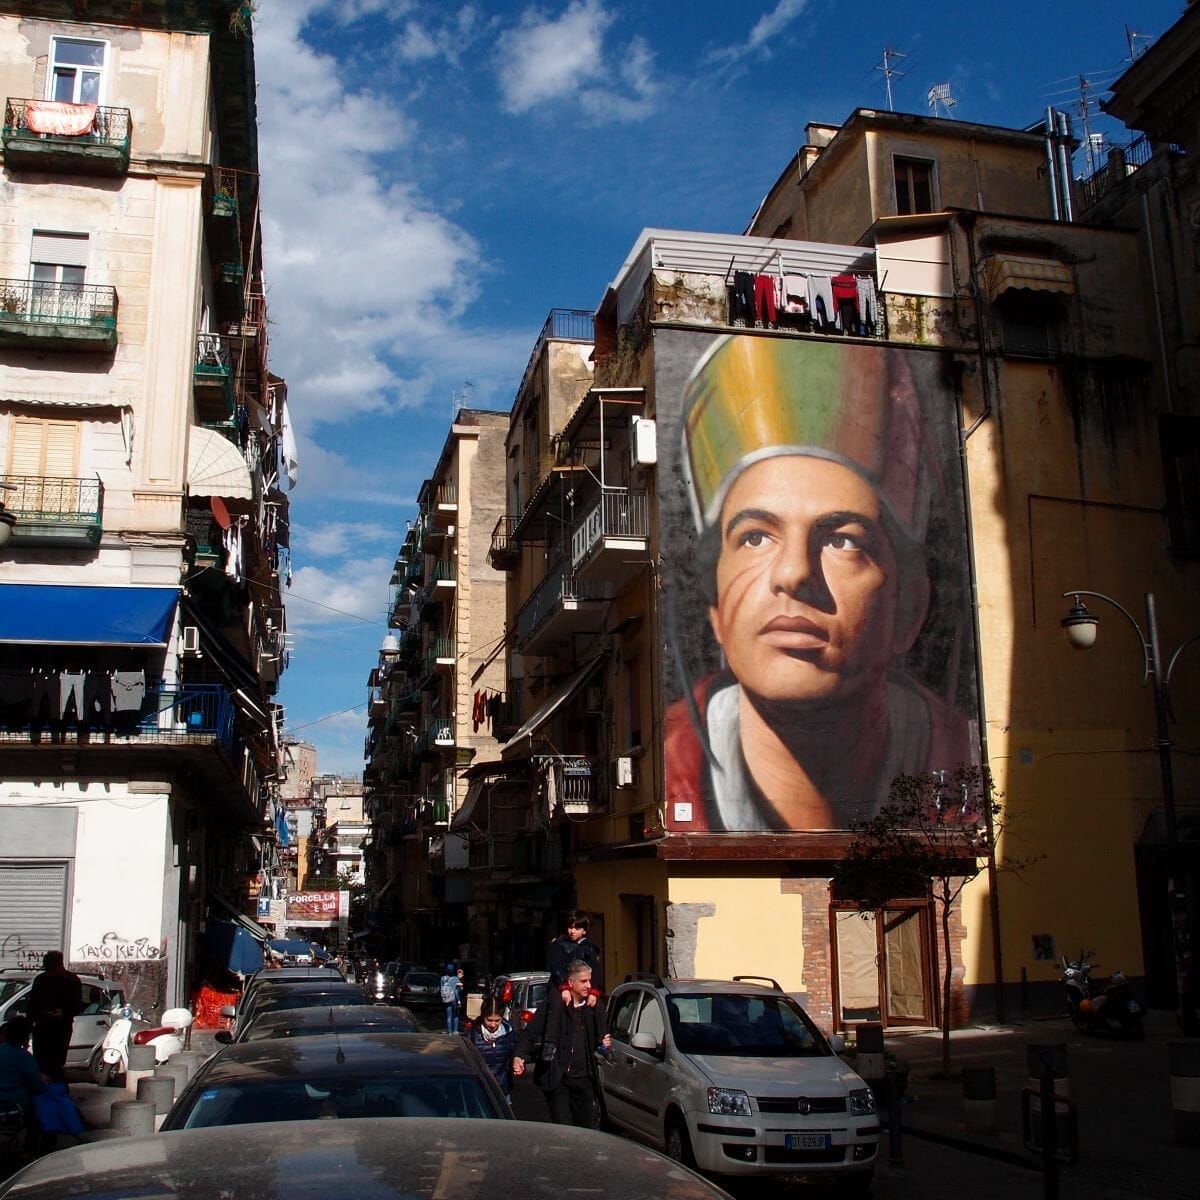 A view of a street in Naples, Italy, displaying street art from the artist Jorit.